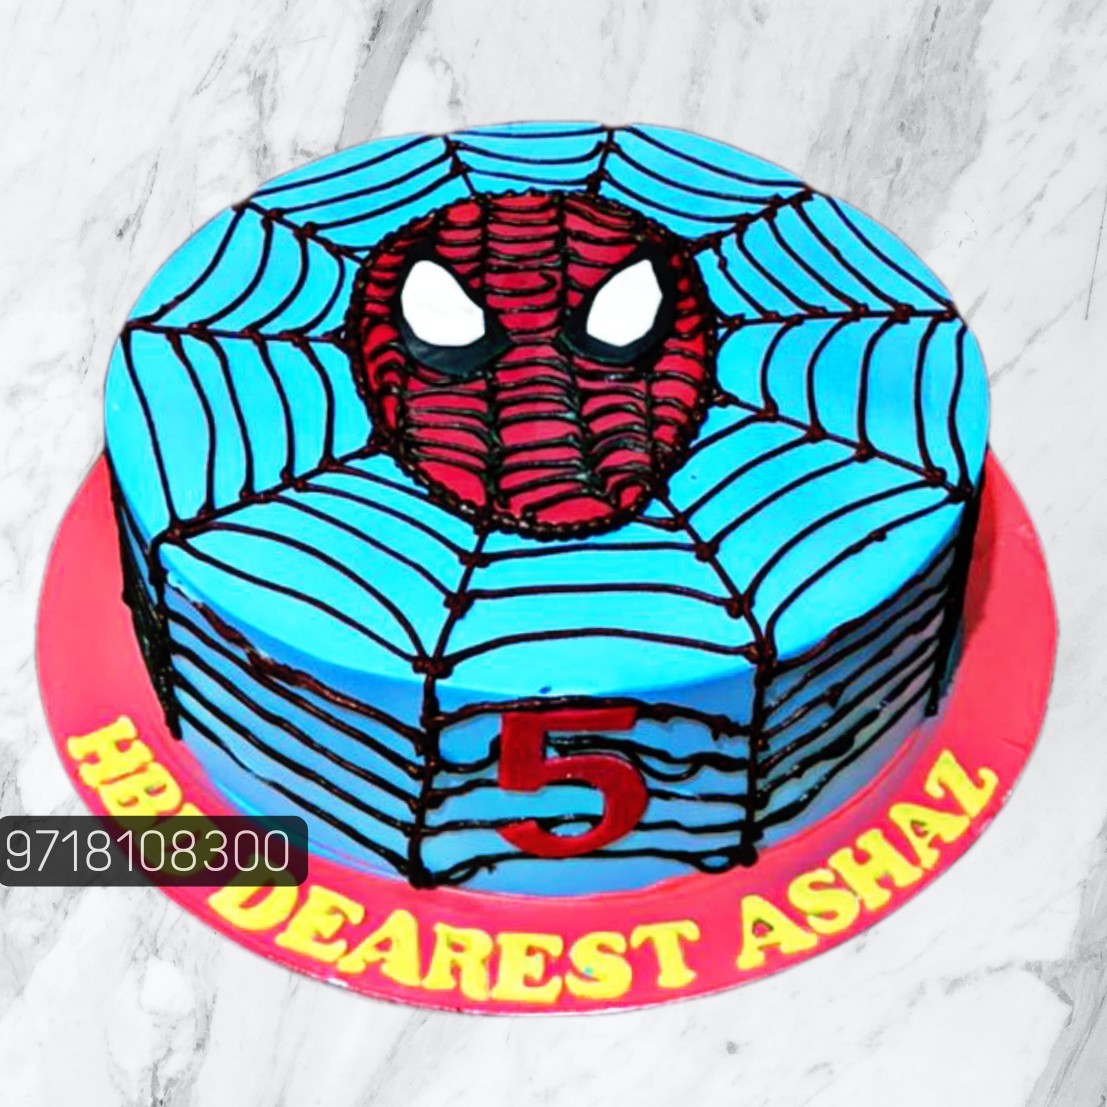 Spiderman and Batman 5 Number Cake Delivery in Delhi NCR - ₹5,999.00 Cake  Express